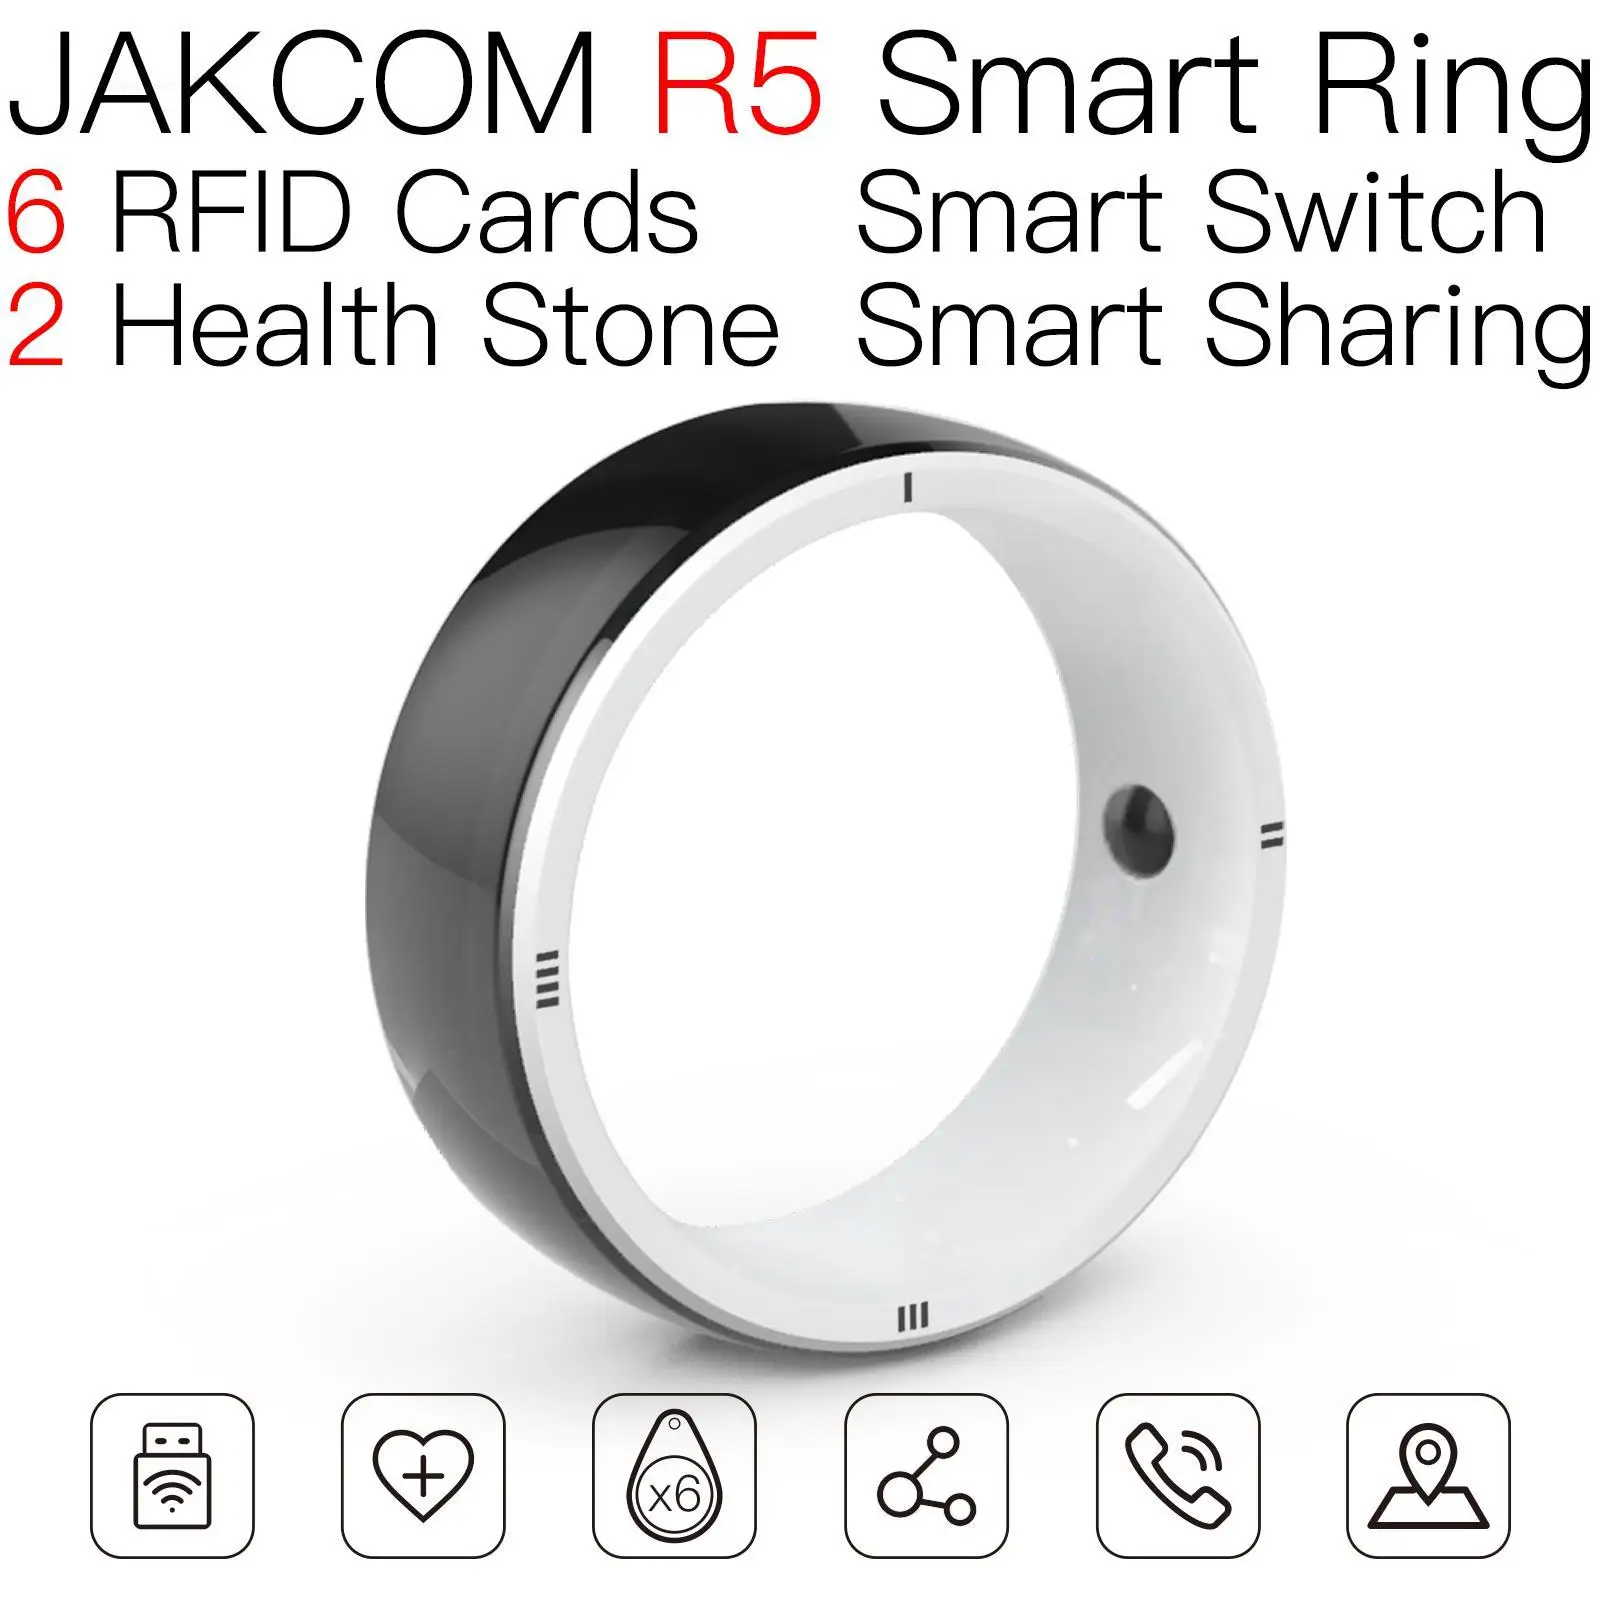 

JAKCOM R5 Smart Ring Super value as rfid tags 125khz 500 pc nfc chip in hand tag animal uwb stickers motorcycle 125 khz